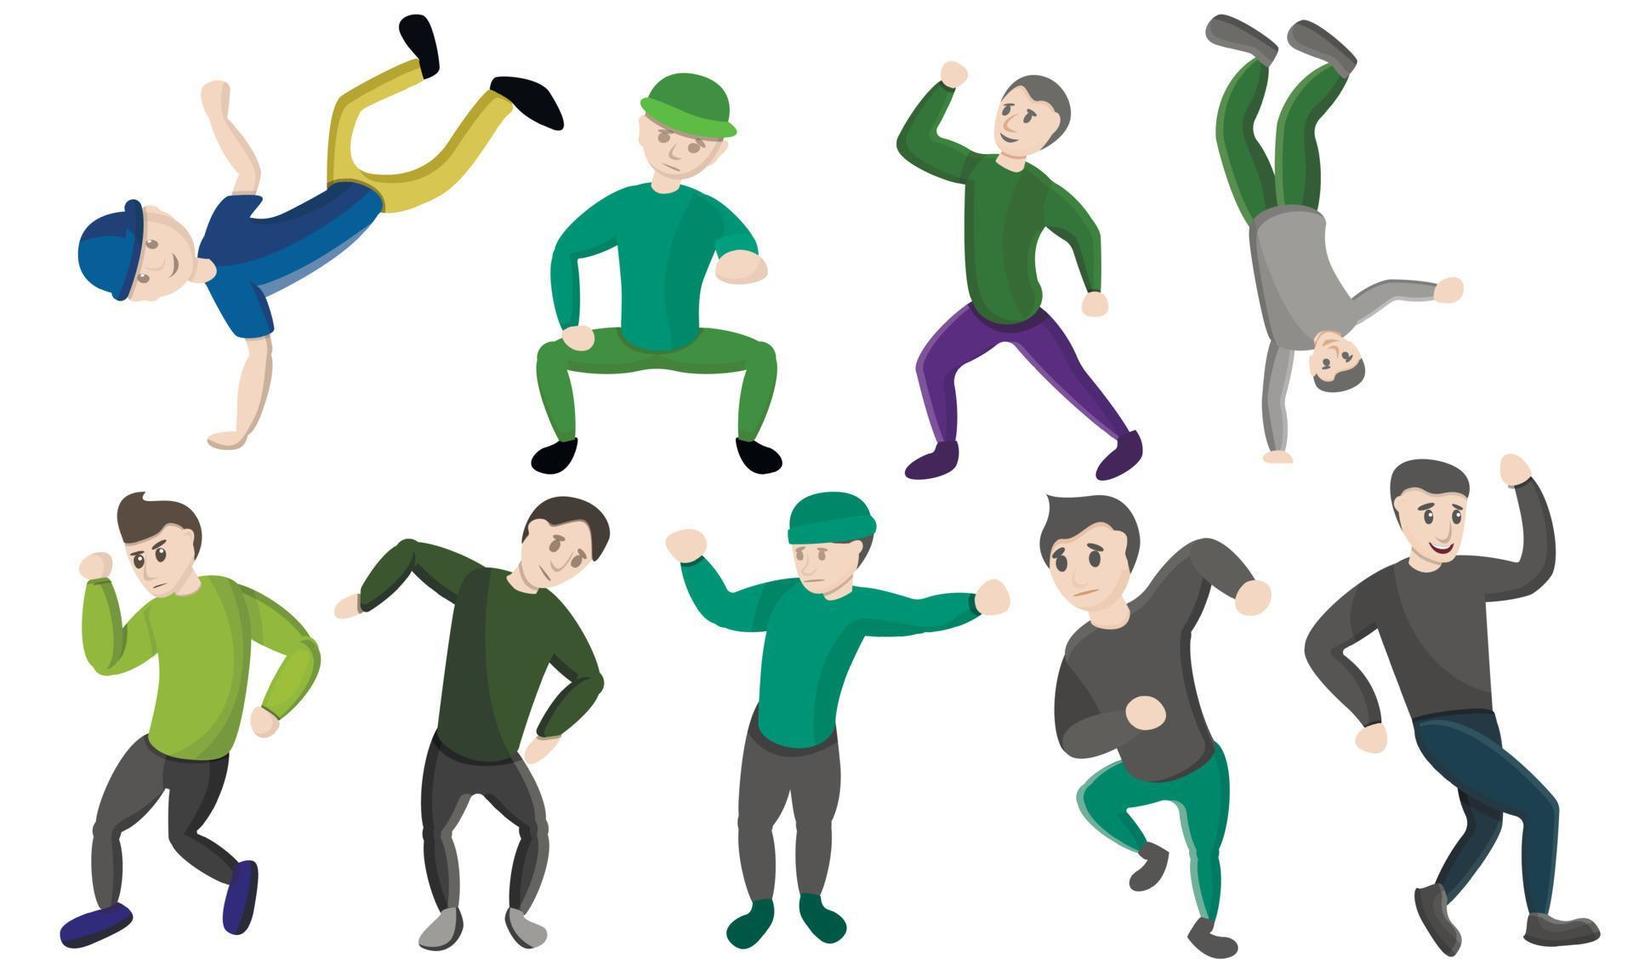 Hiphop dance icons set, cartoon style vector